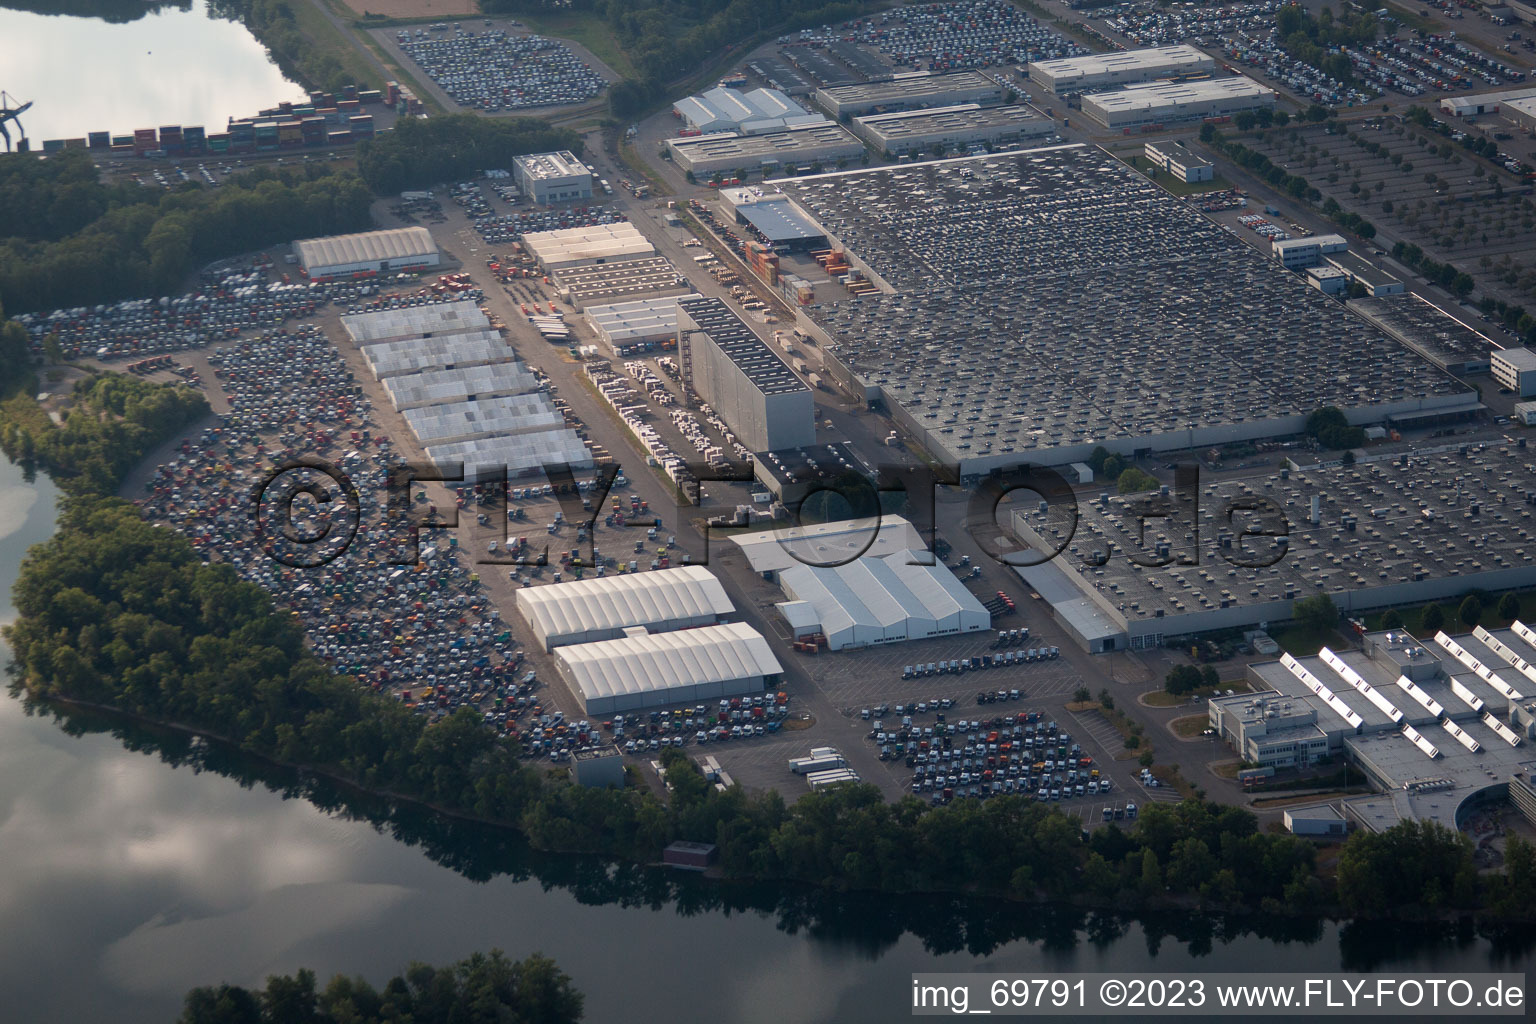 Aerial view of Daimler truck assembly plant in Wörth am Rhein in the state Rhineland-Palatinate, Germany